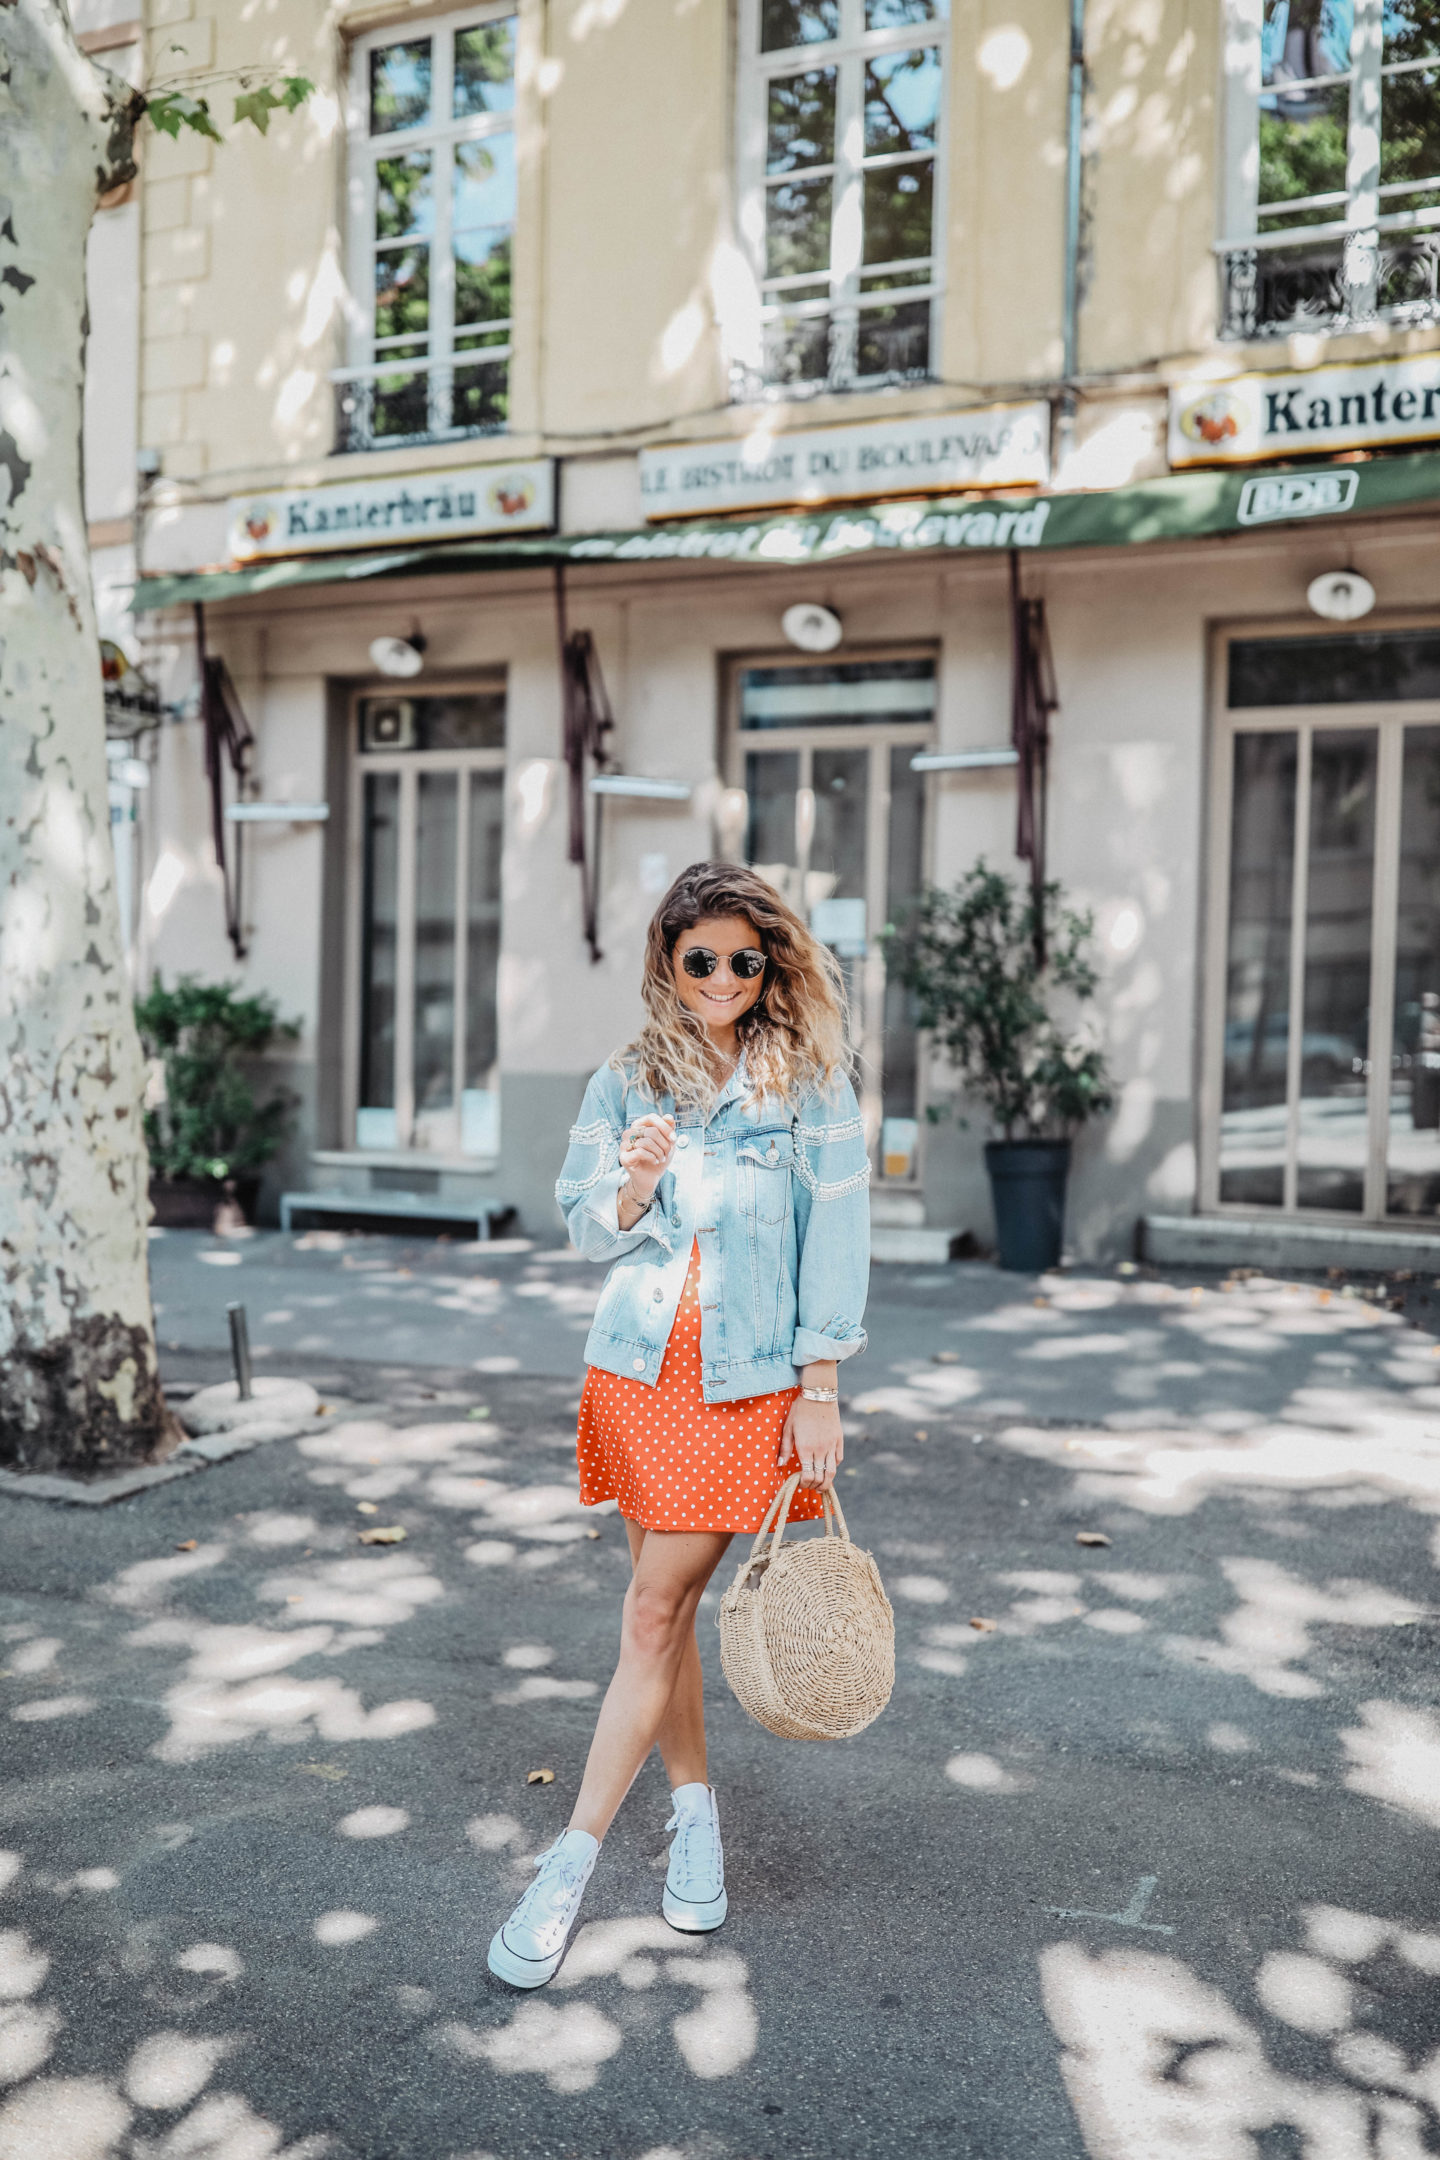 Polka dot outfit fashion blogger marie and mood